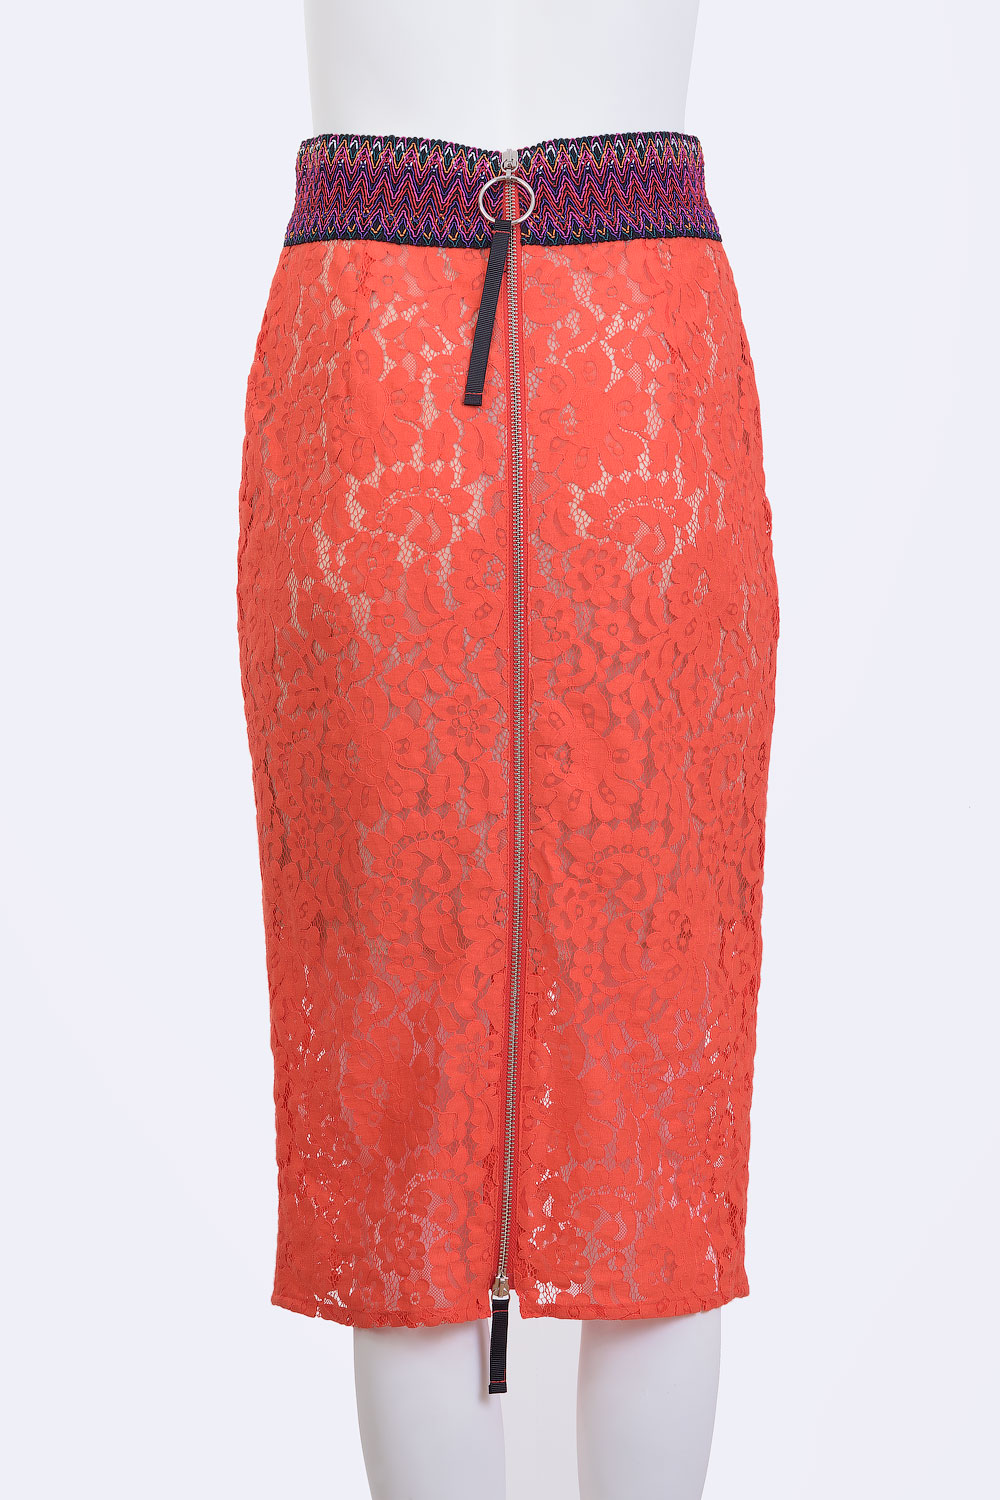 Vintage Style Embroidered Lace Skirt Back Zipper TENAX Red - CLADDIO